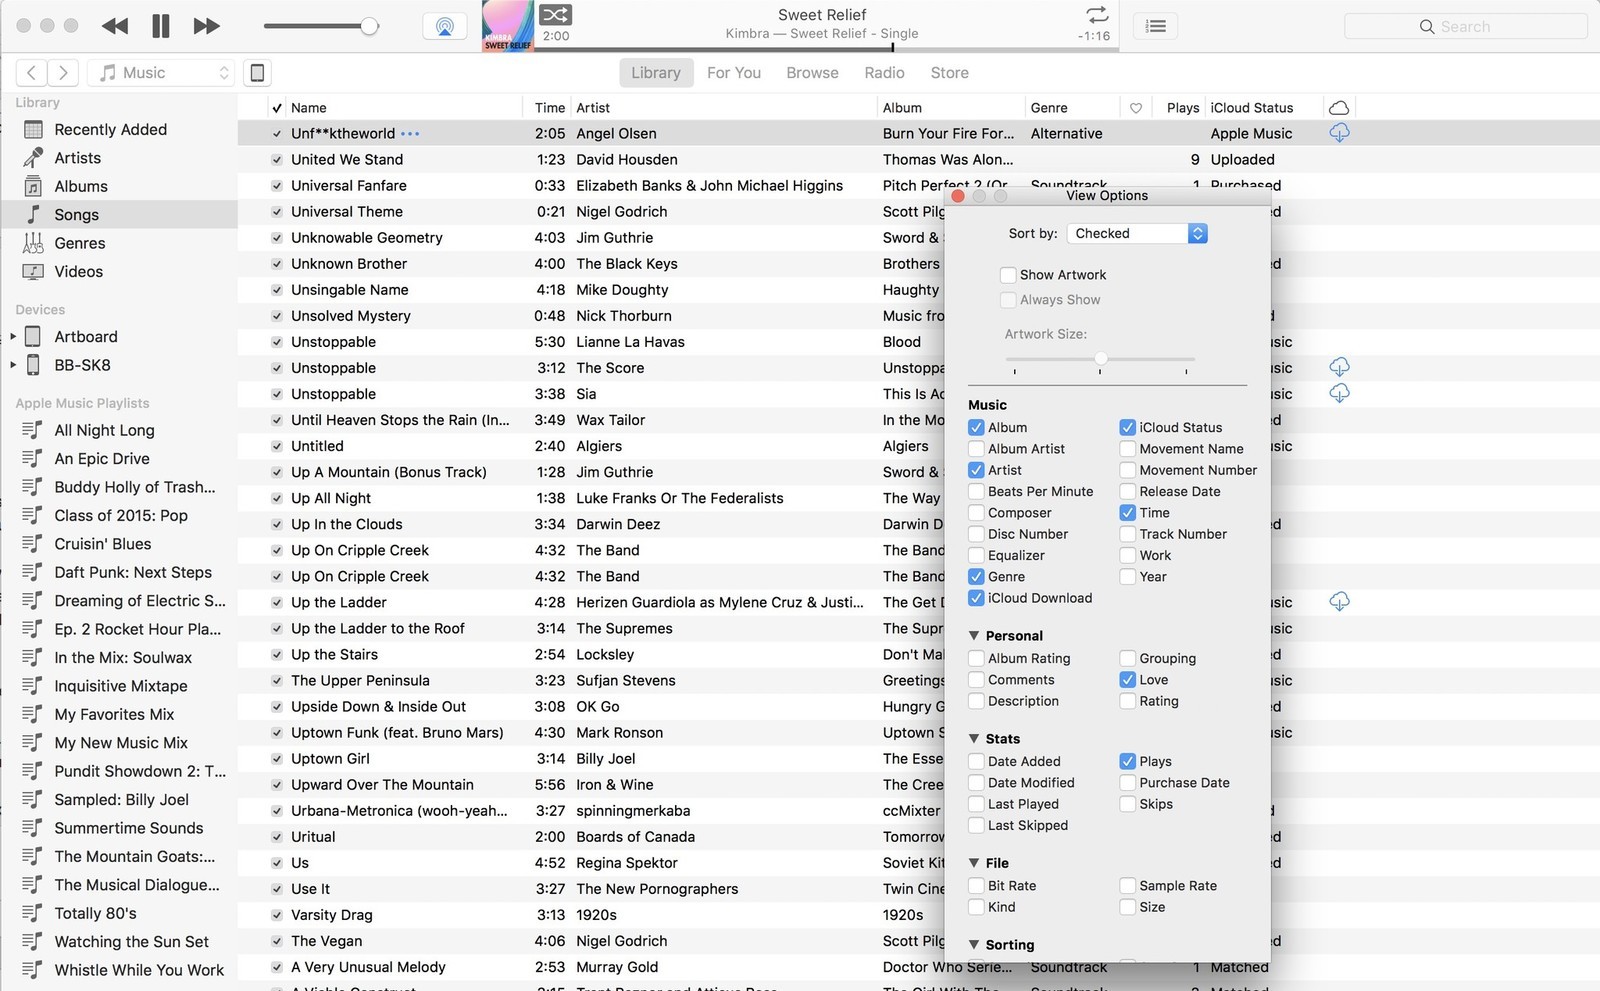 Download Icloud Music Library To Mac